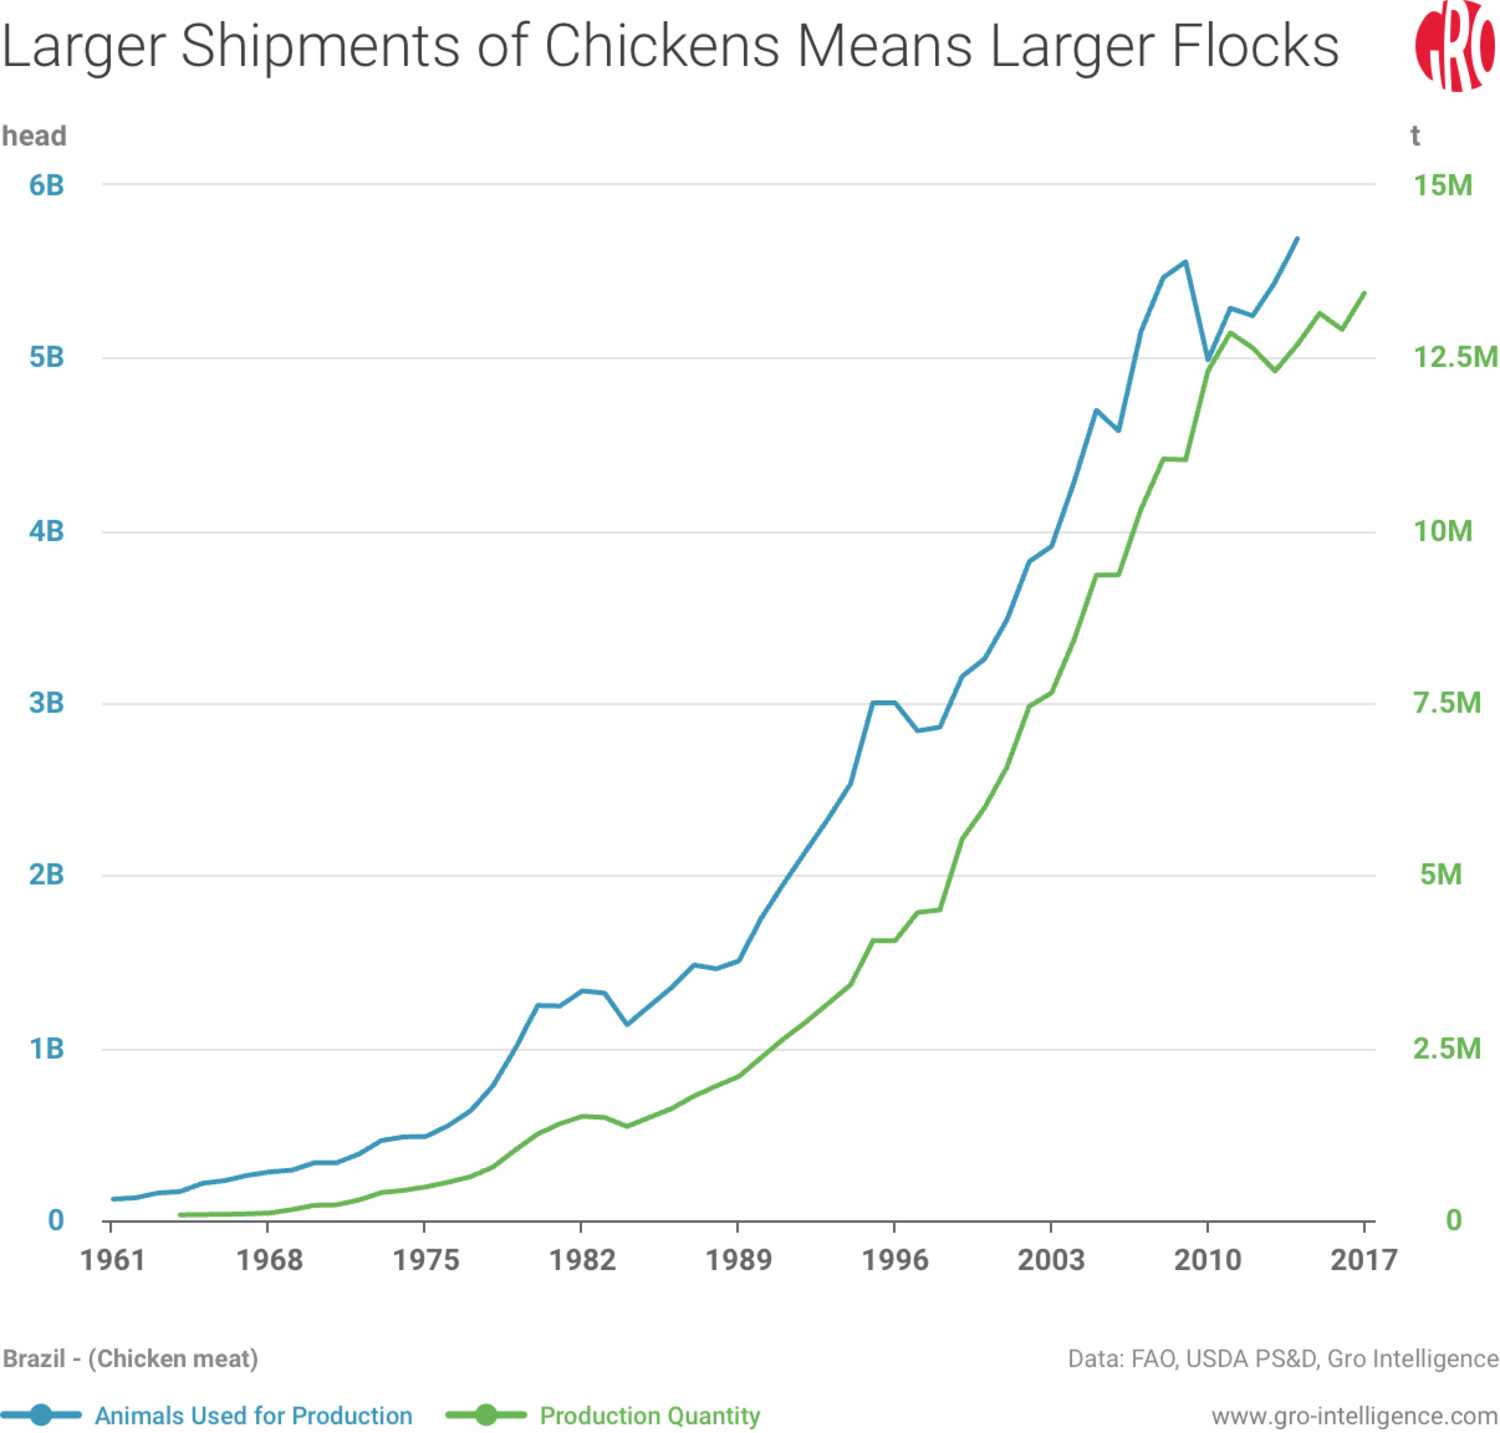 Larger Shipments of Chickens Means Larger Flocks